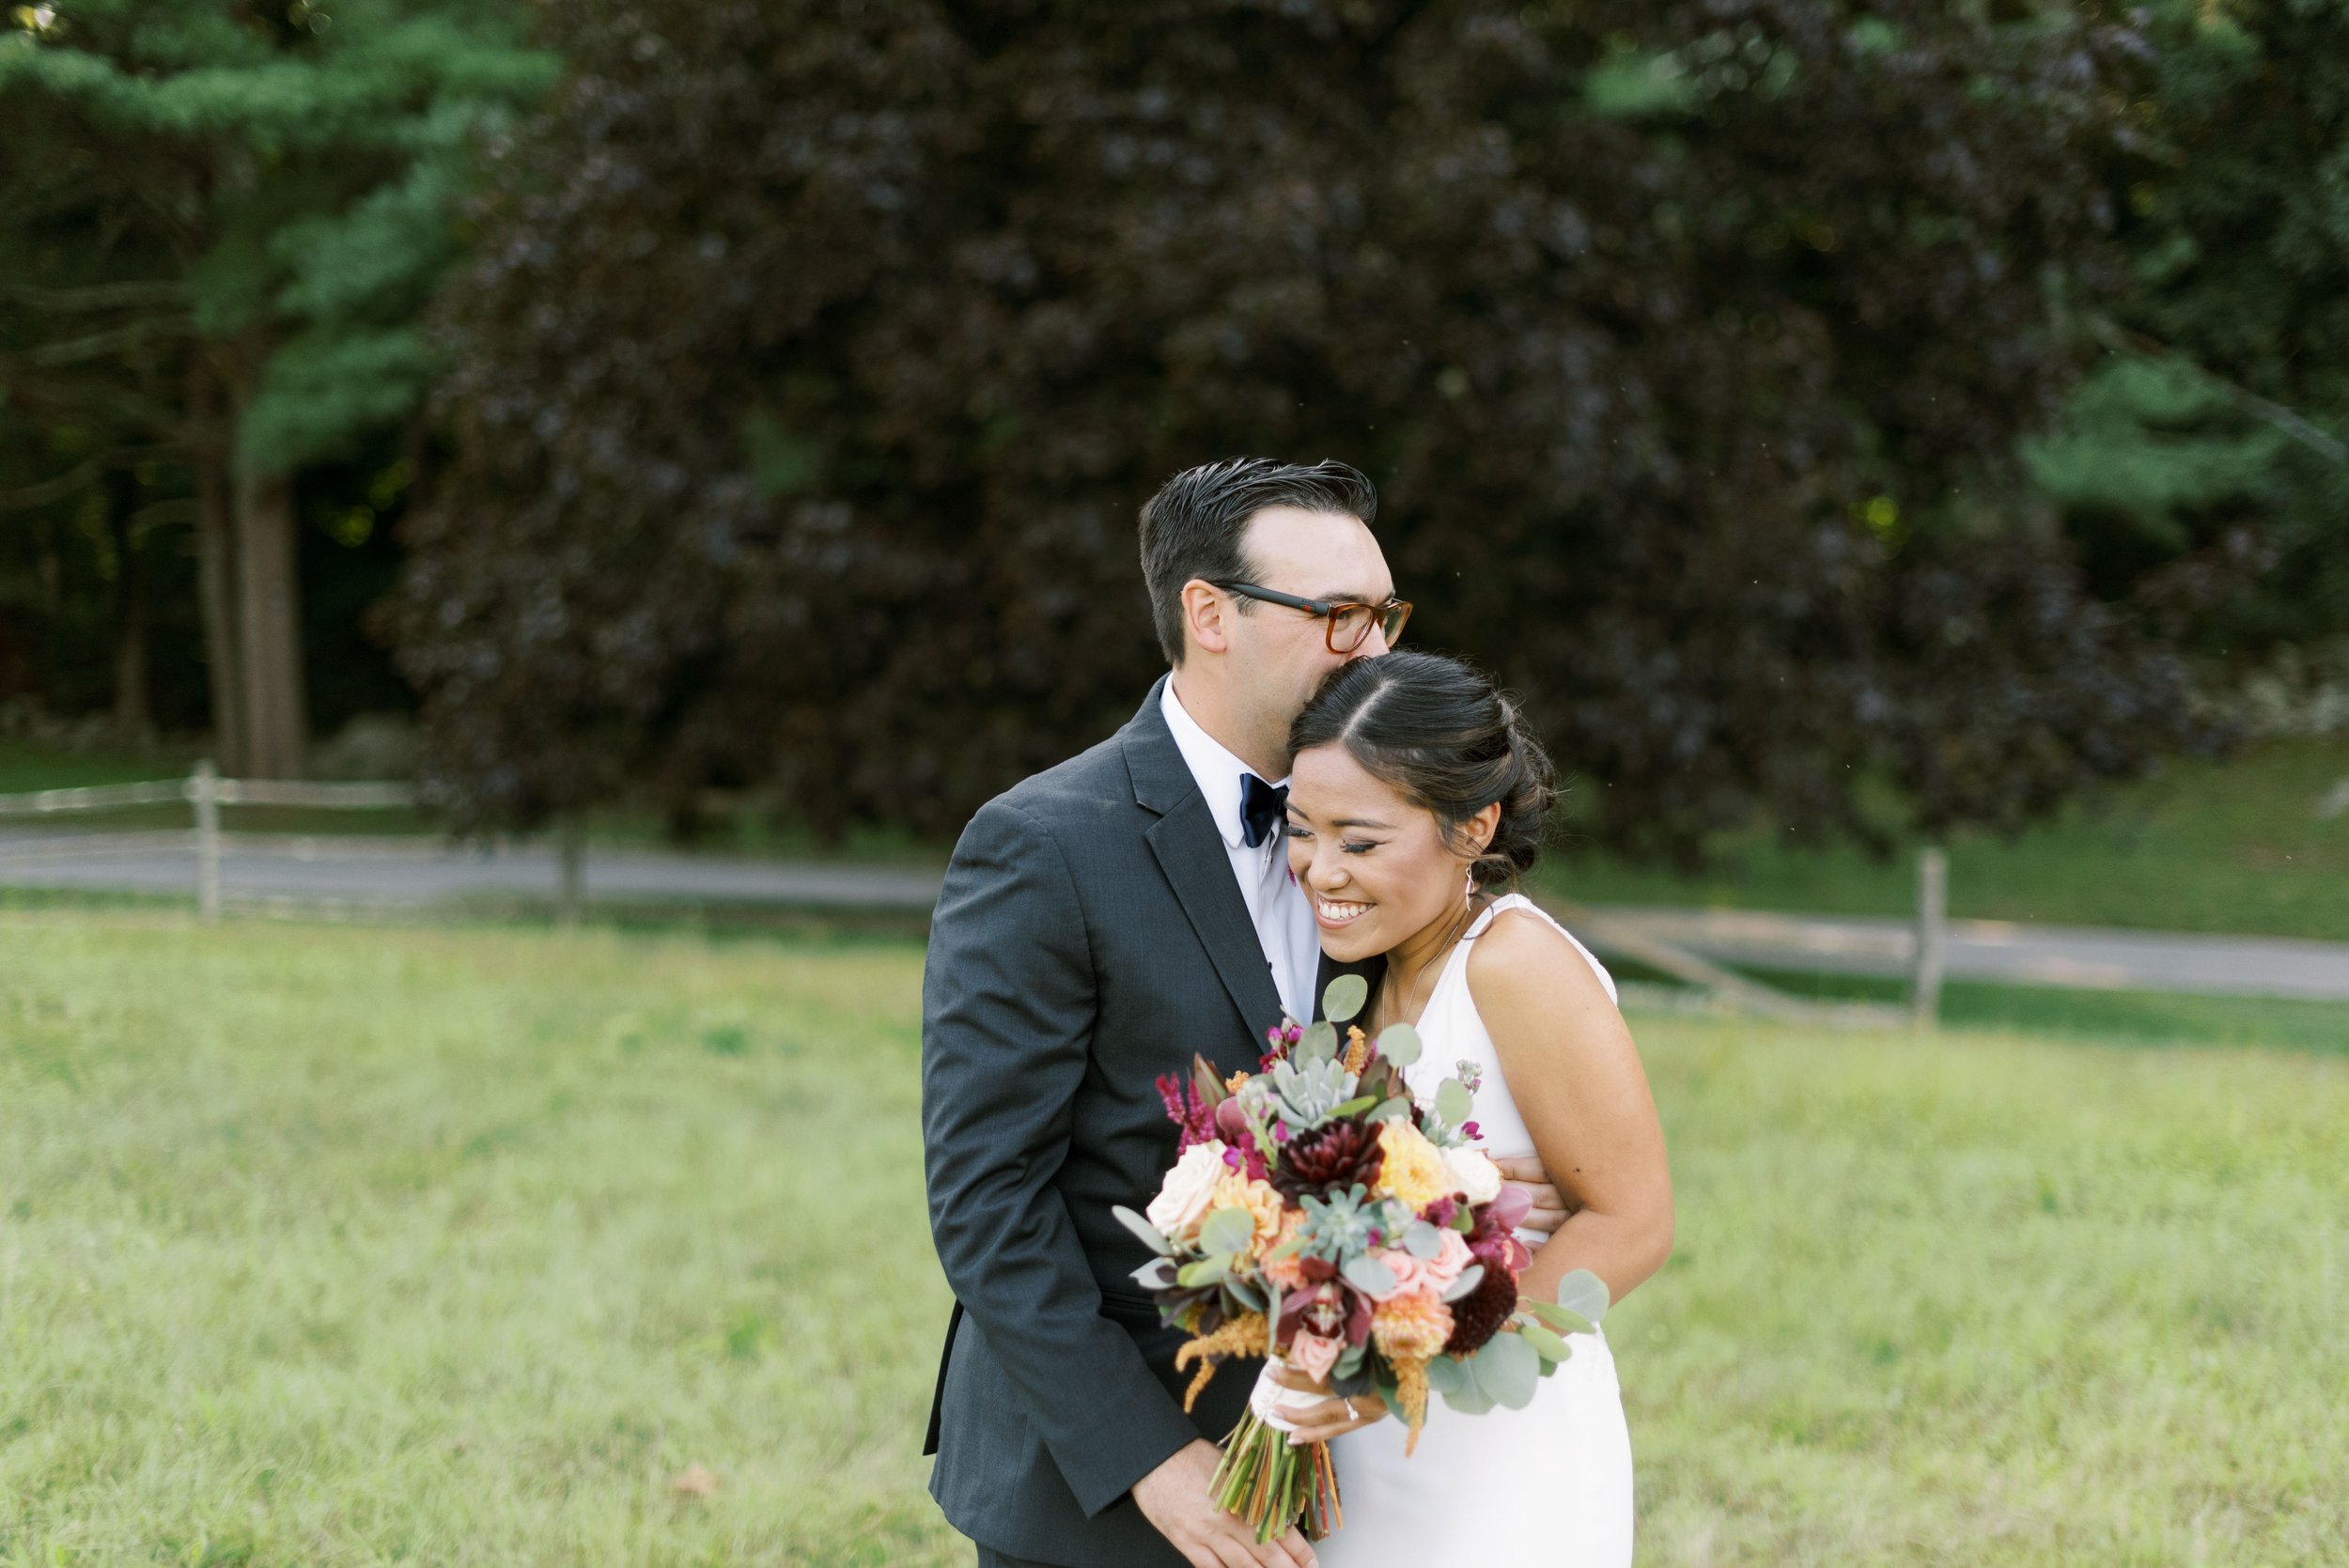 Wedding Photographers in Amherst MA